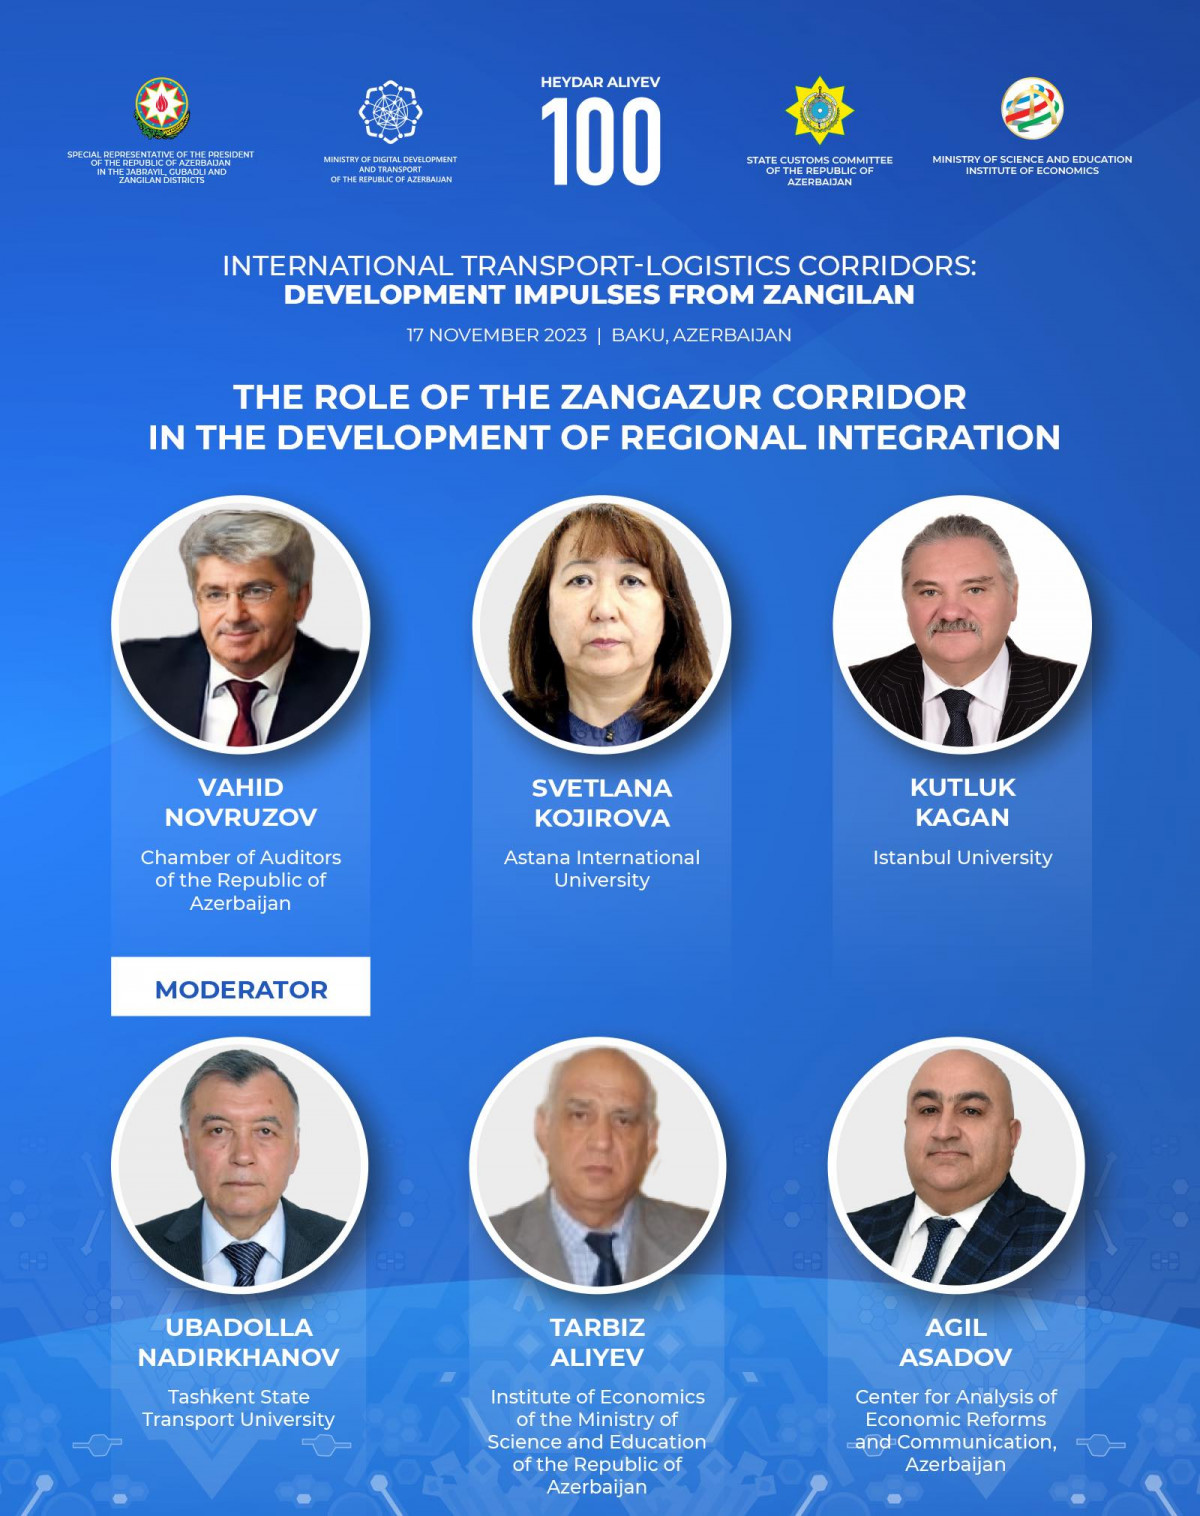 The Head of the Department of CAERC participated in the conference on "International Transport-Logistics Corridor: Development Impulses from Zangilan"